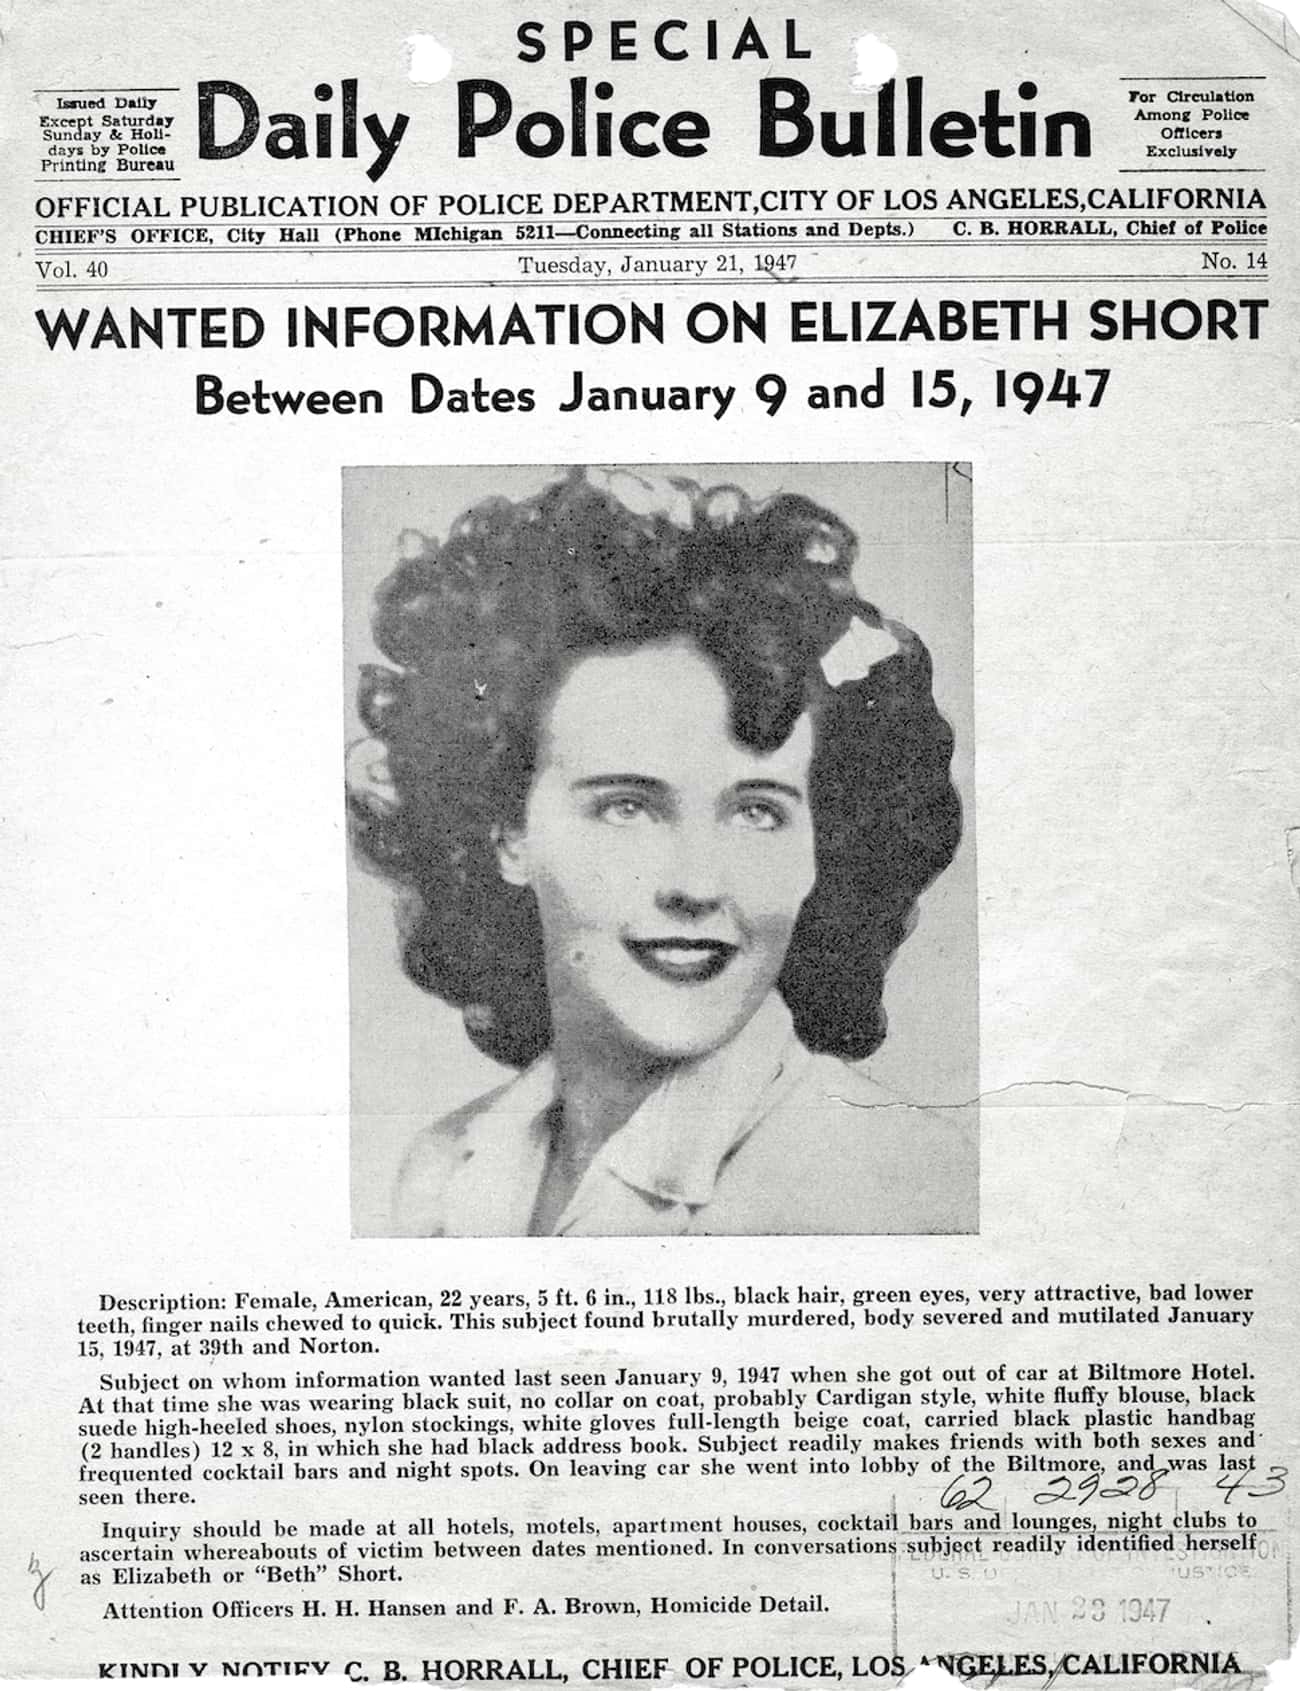 A Photo Of Elizabeth Short Was Found In George Hodel's Things After He Passed 